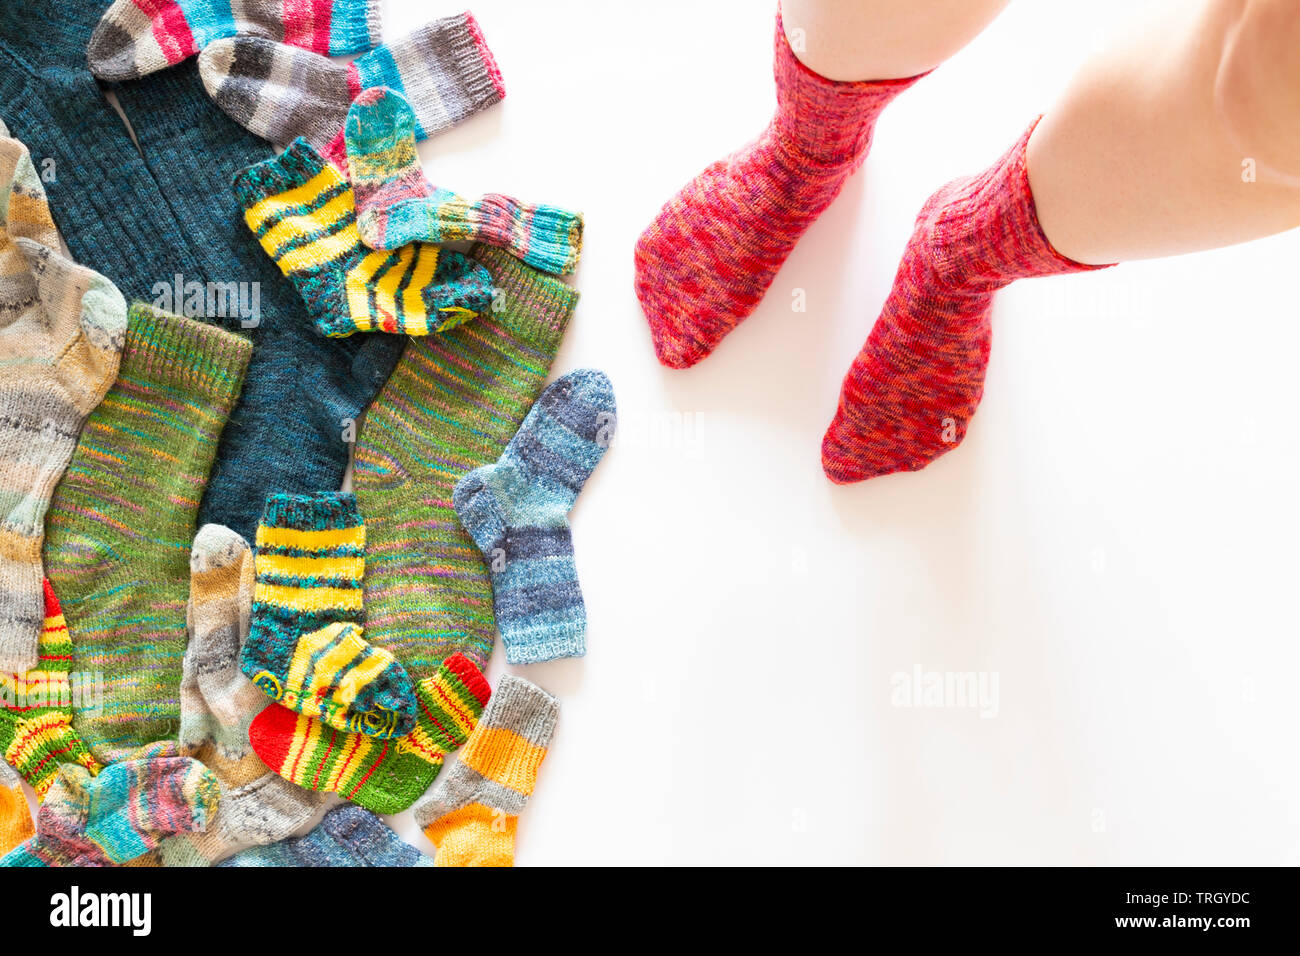 Top view of an assortment of colorful woolen socks of various sizes on white background with a pair of feet wearing red socks Stock Photo